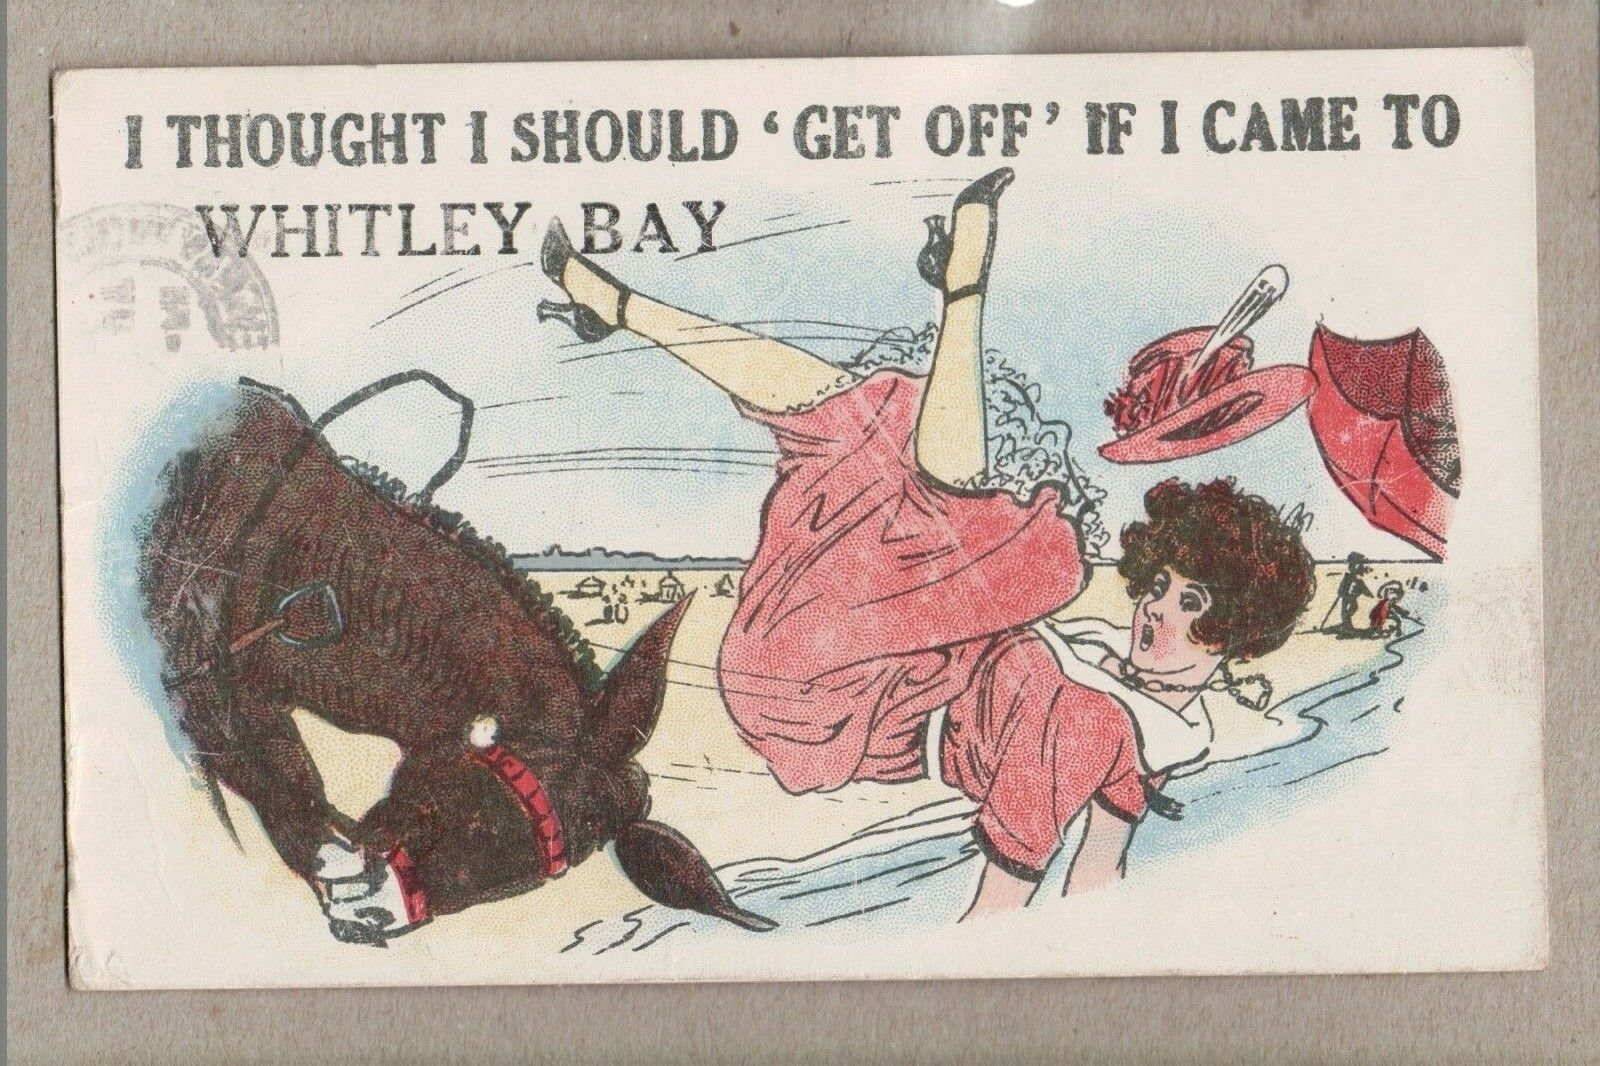 House Clearance - I Thought I Should Get Off If I Came To WHITLEY BAY 1920 ? Service ~ Horse